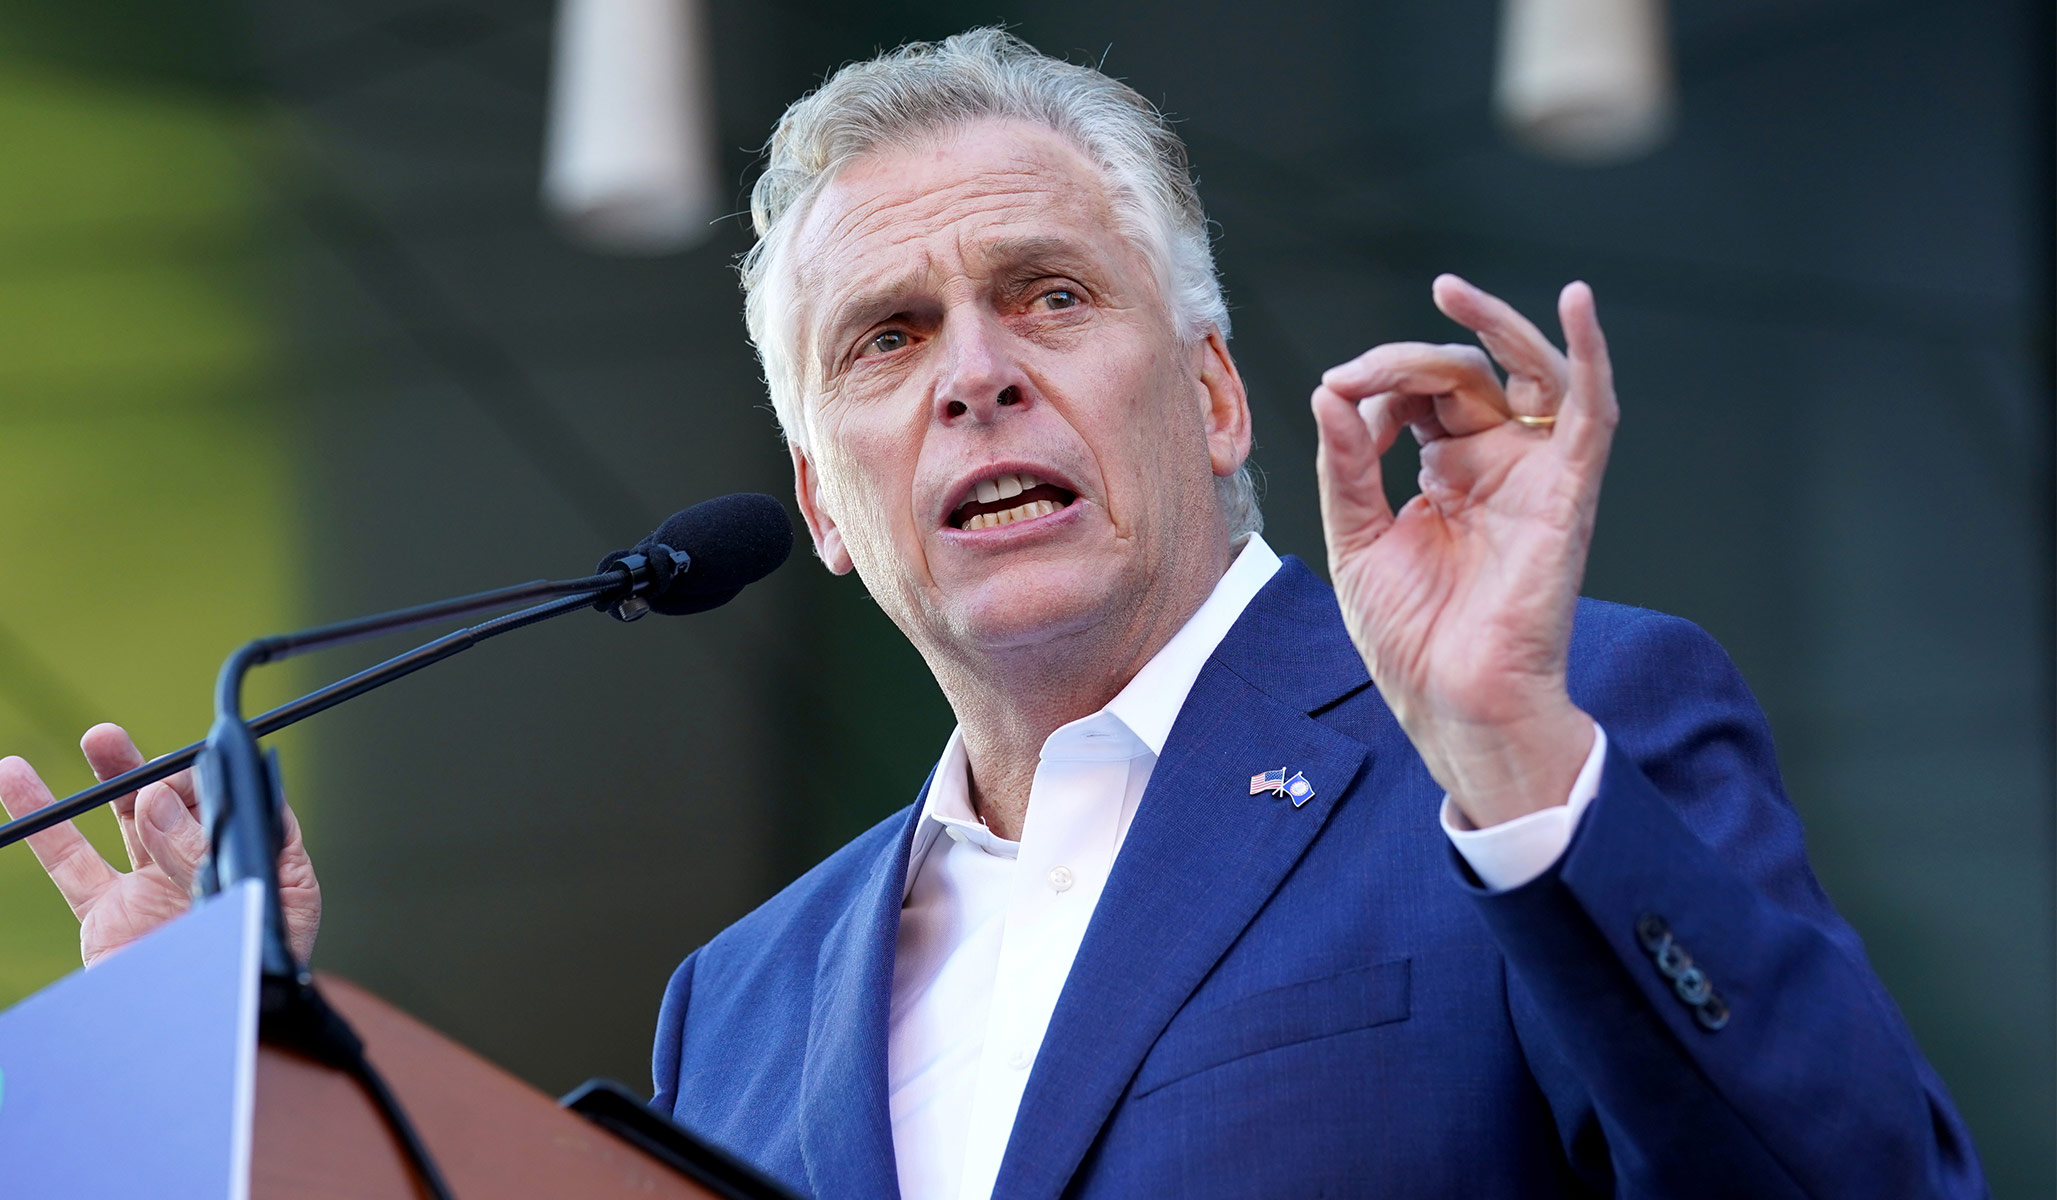 McAuliffe Claims ‘Everybody Clapped’ When He Argued Parents Shouldn’t Be Involved in School Curriculum